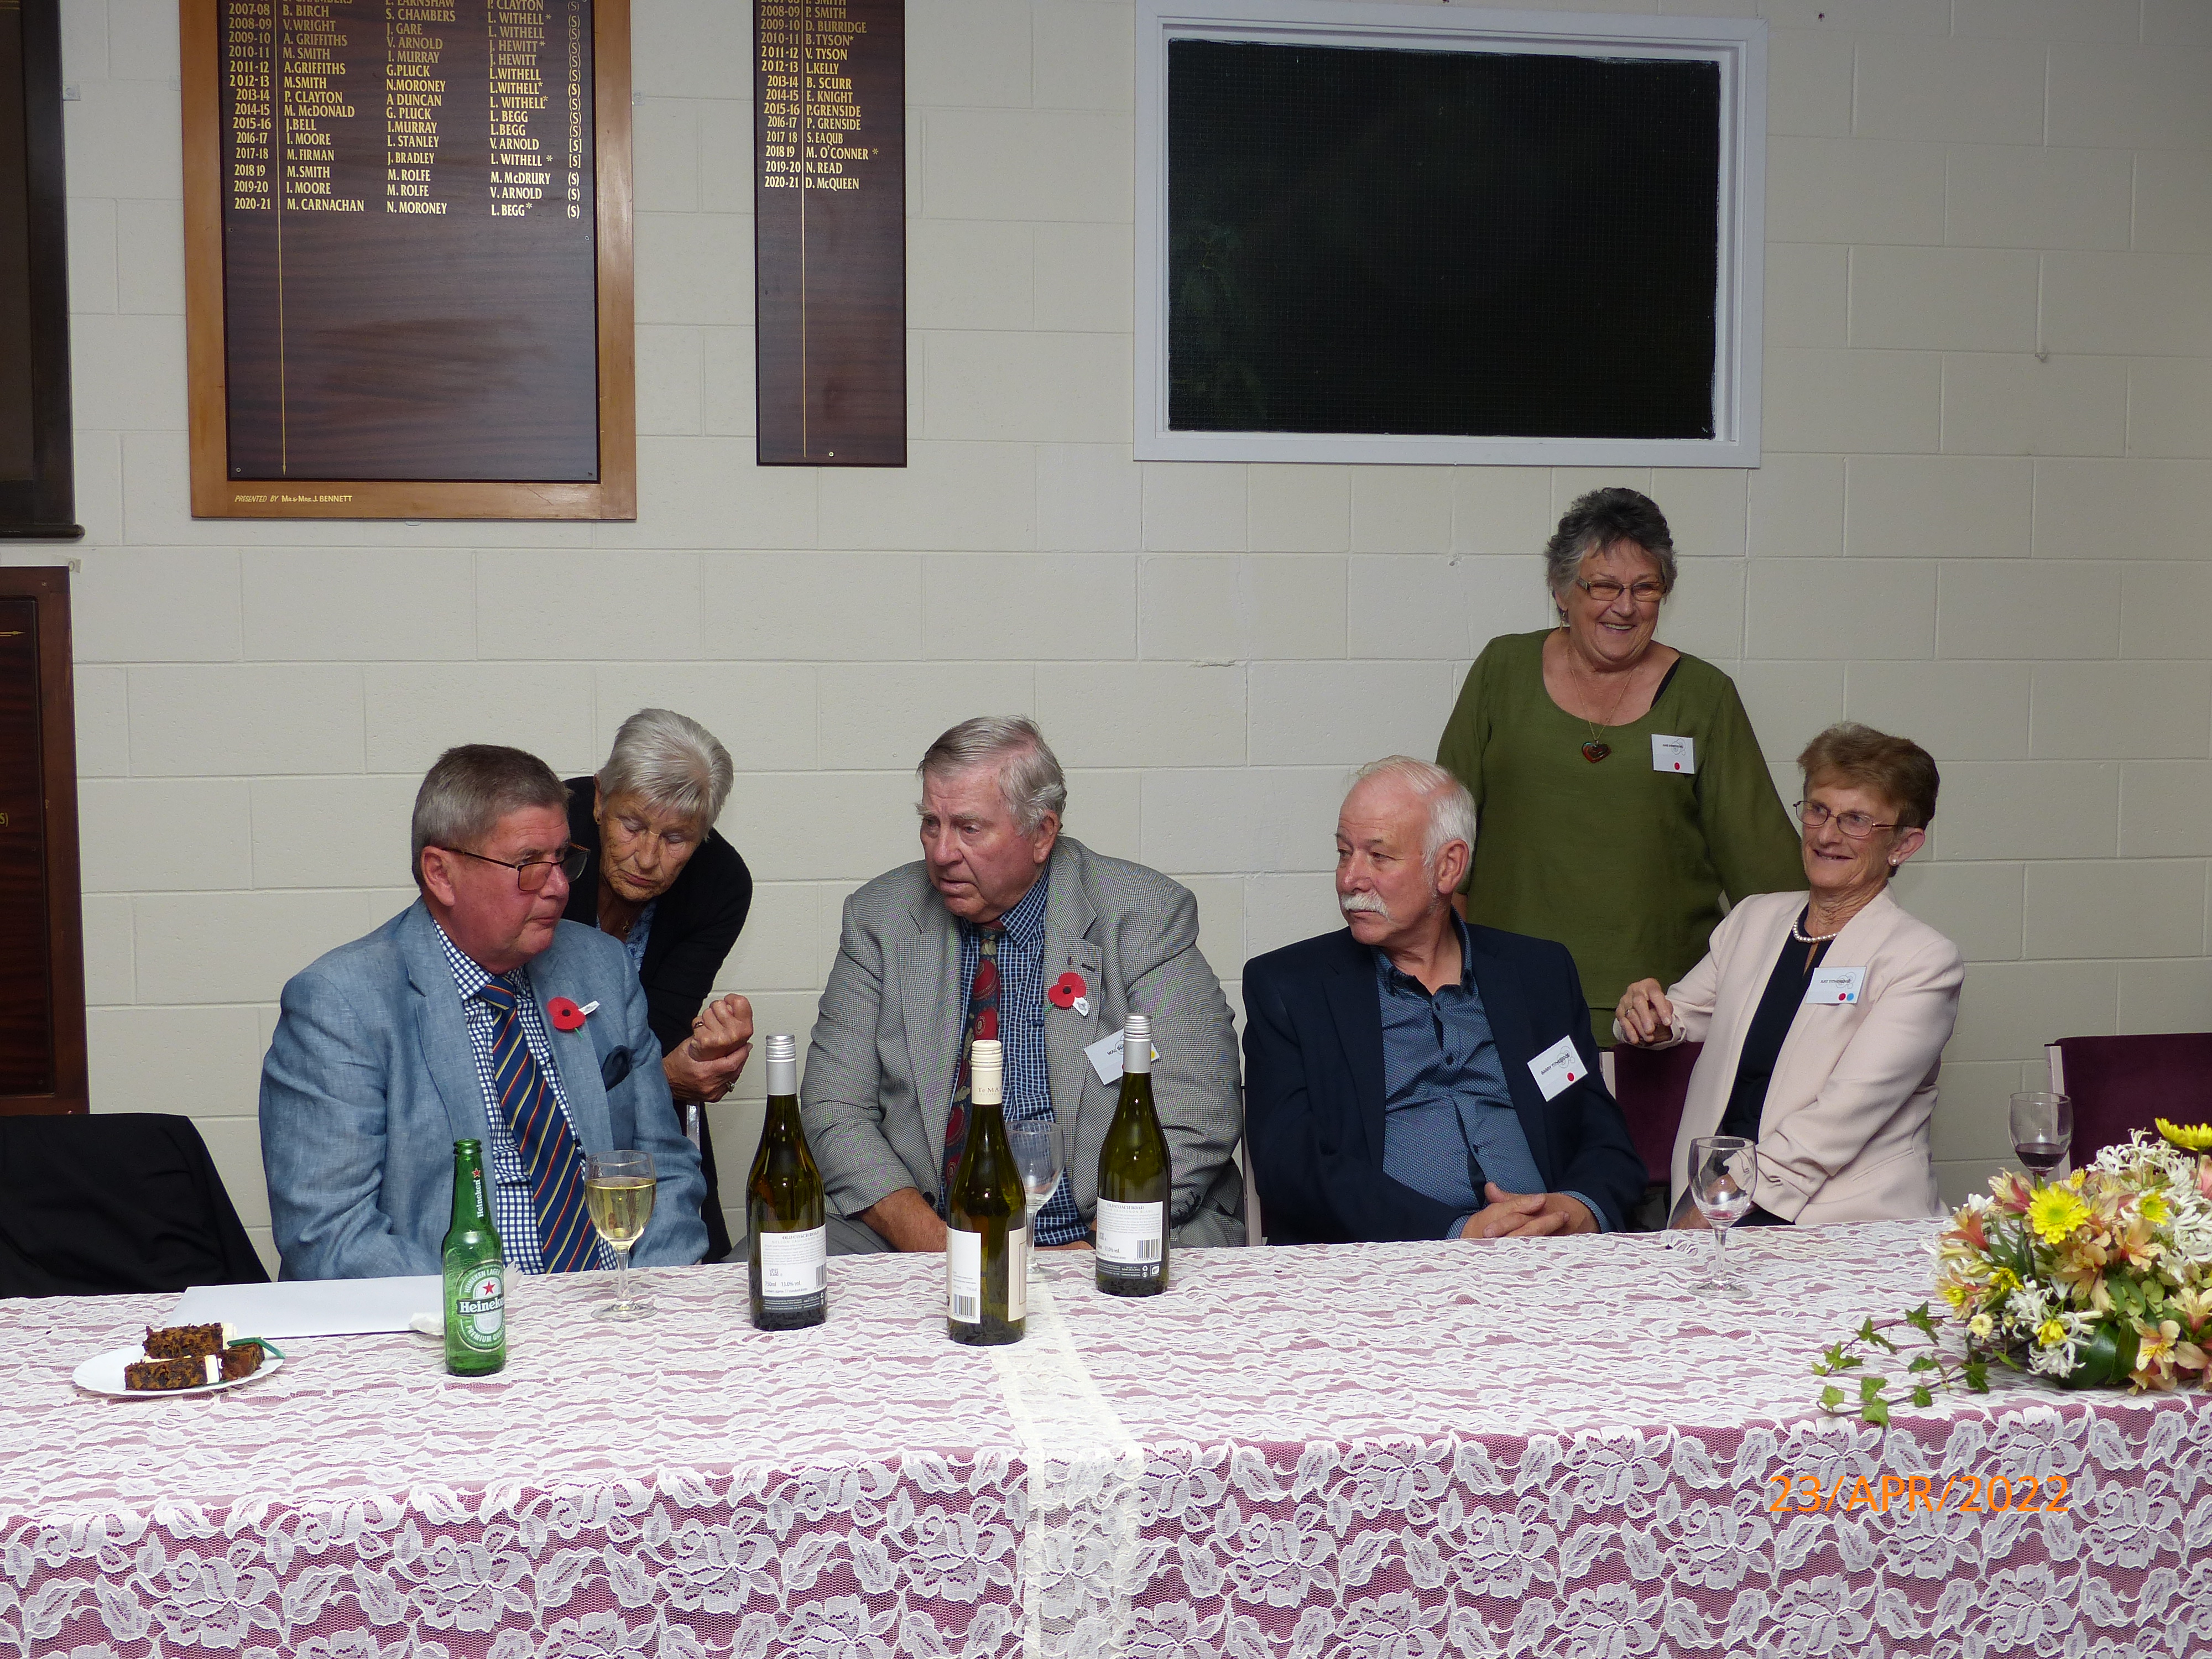 Pete Smith, Lyndsey Withell, Wal Scott, Barry Titheridge, June Armstrong and Kay Titheridge